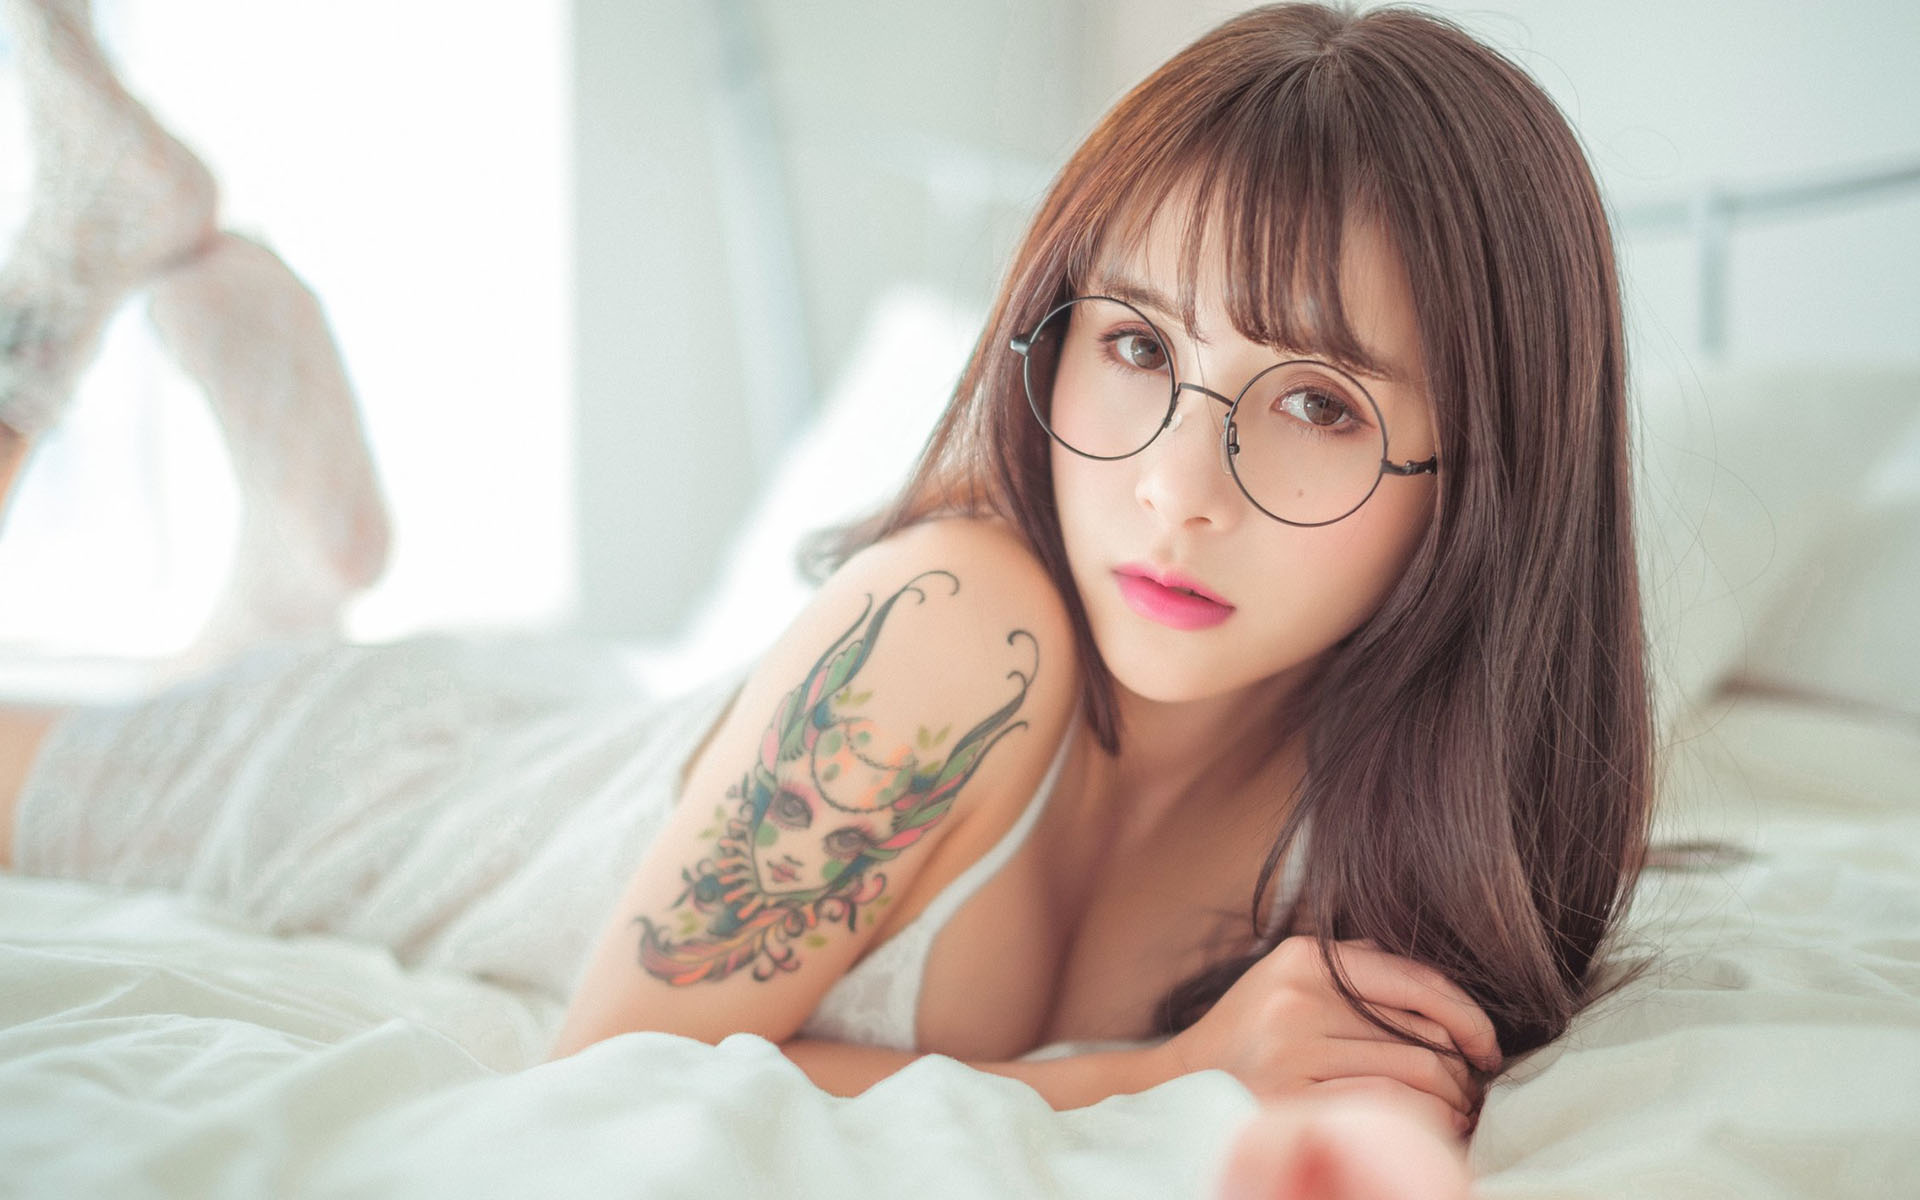 People 1920x1200 Asian women model glasses lying down bed Xia Mei Jiang women with glasses in bed lying on front